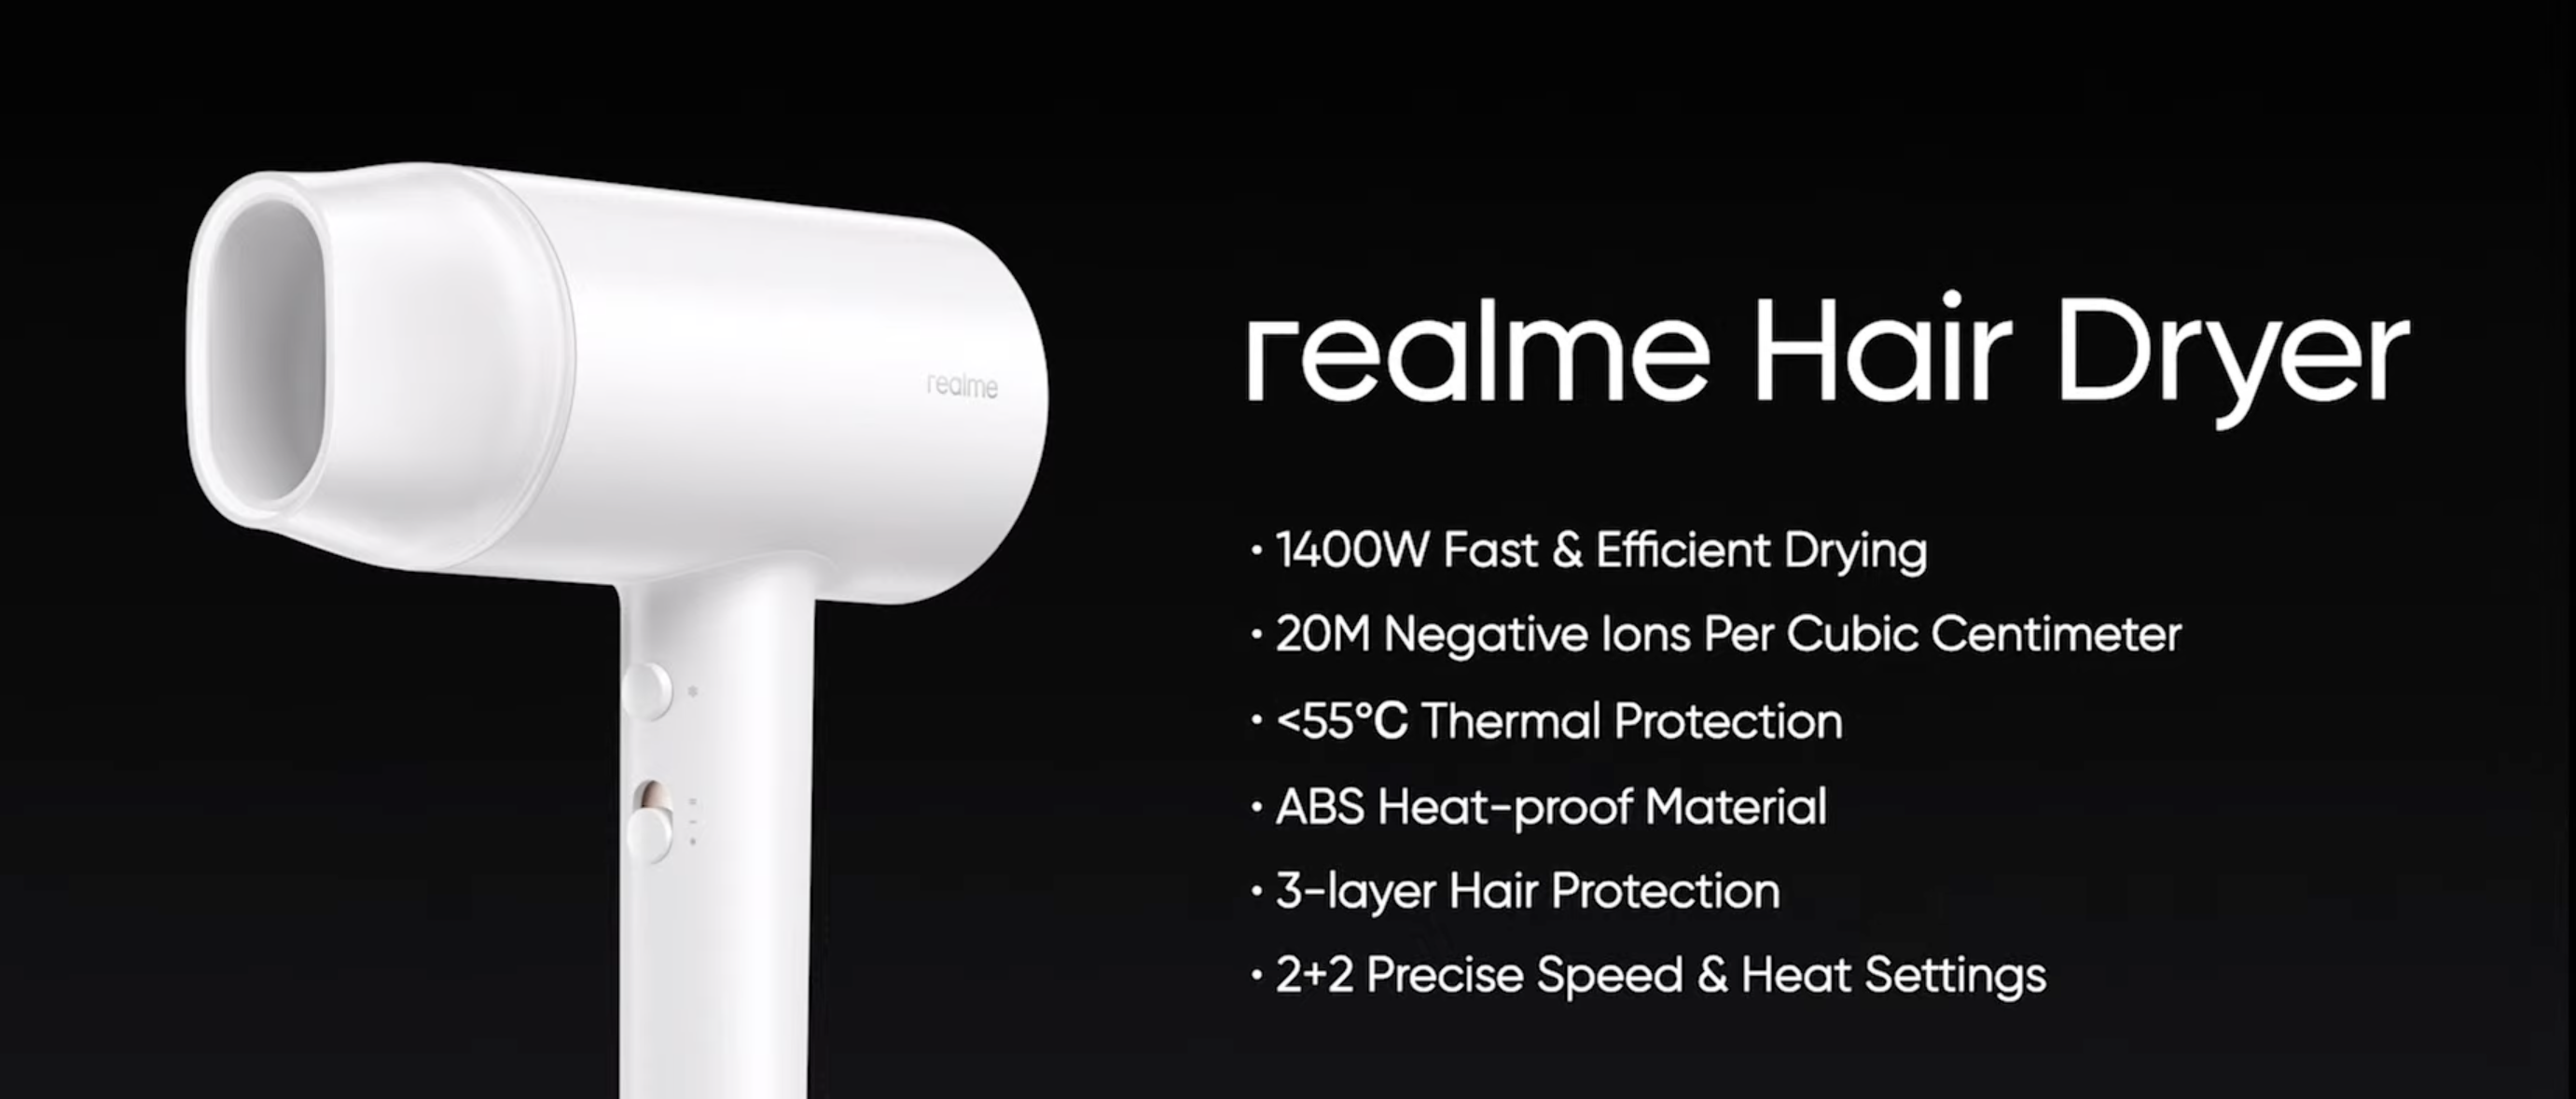 Realme India launch highlights: Realme Buds 2 Neo launched at Rs 499, Beard  Trimmer priced starting Rs 1,299, Hair Dryer at Rs 1,999- Technology News,  Firstpost